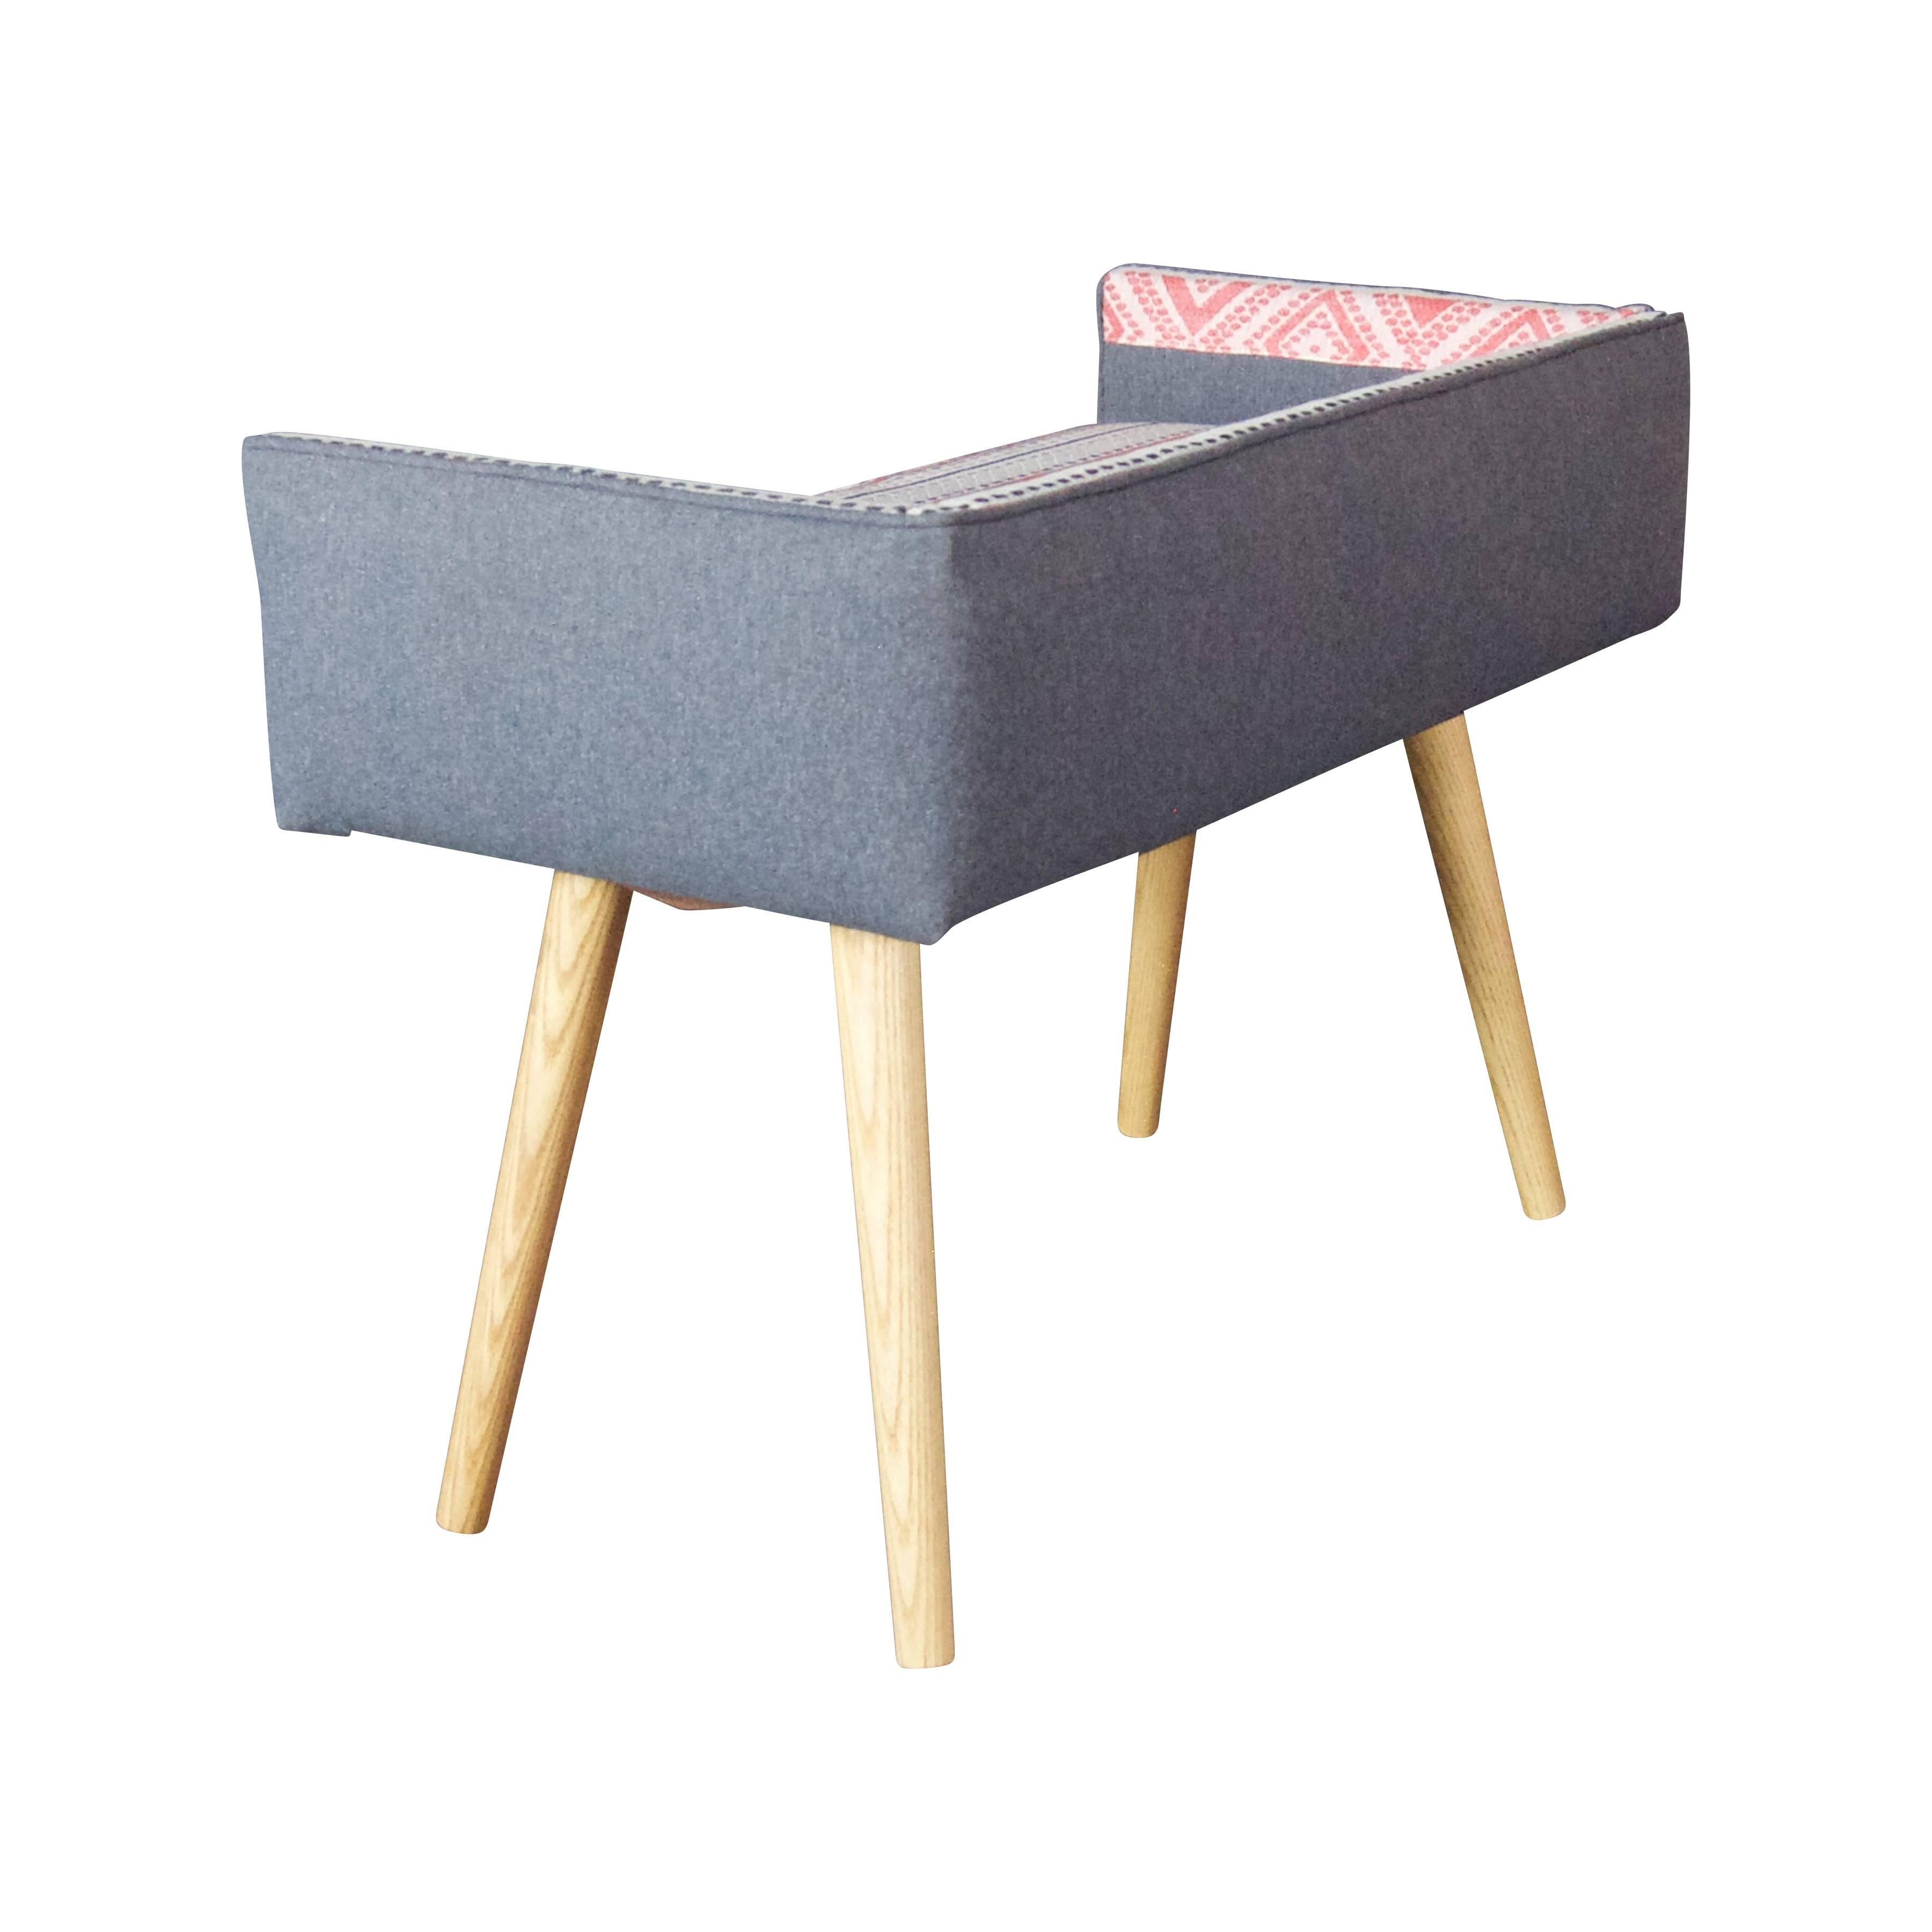 American Studio Series Vanity Size Stool: Gray with Ribbon Detail by Maki (in stock) For Sale